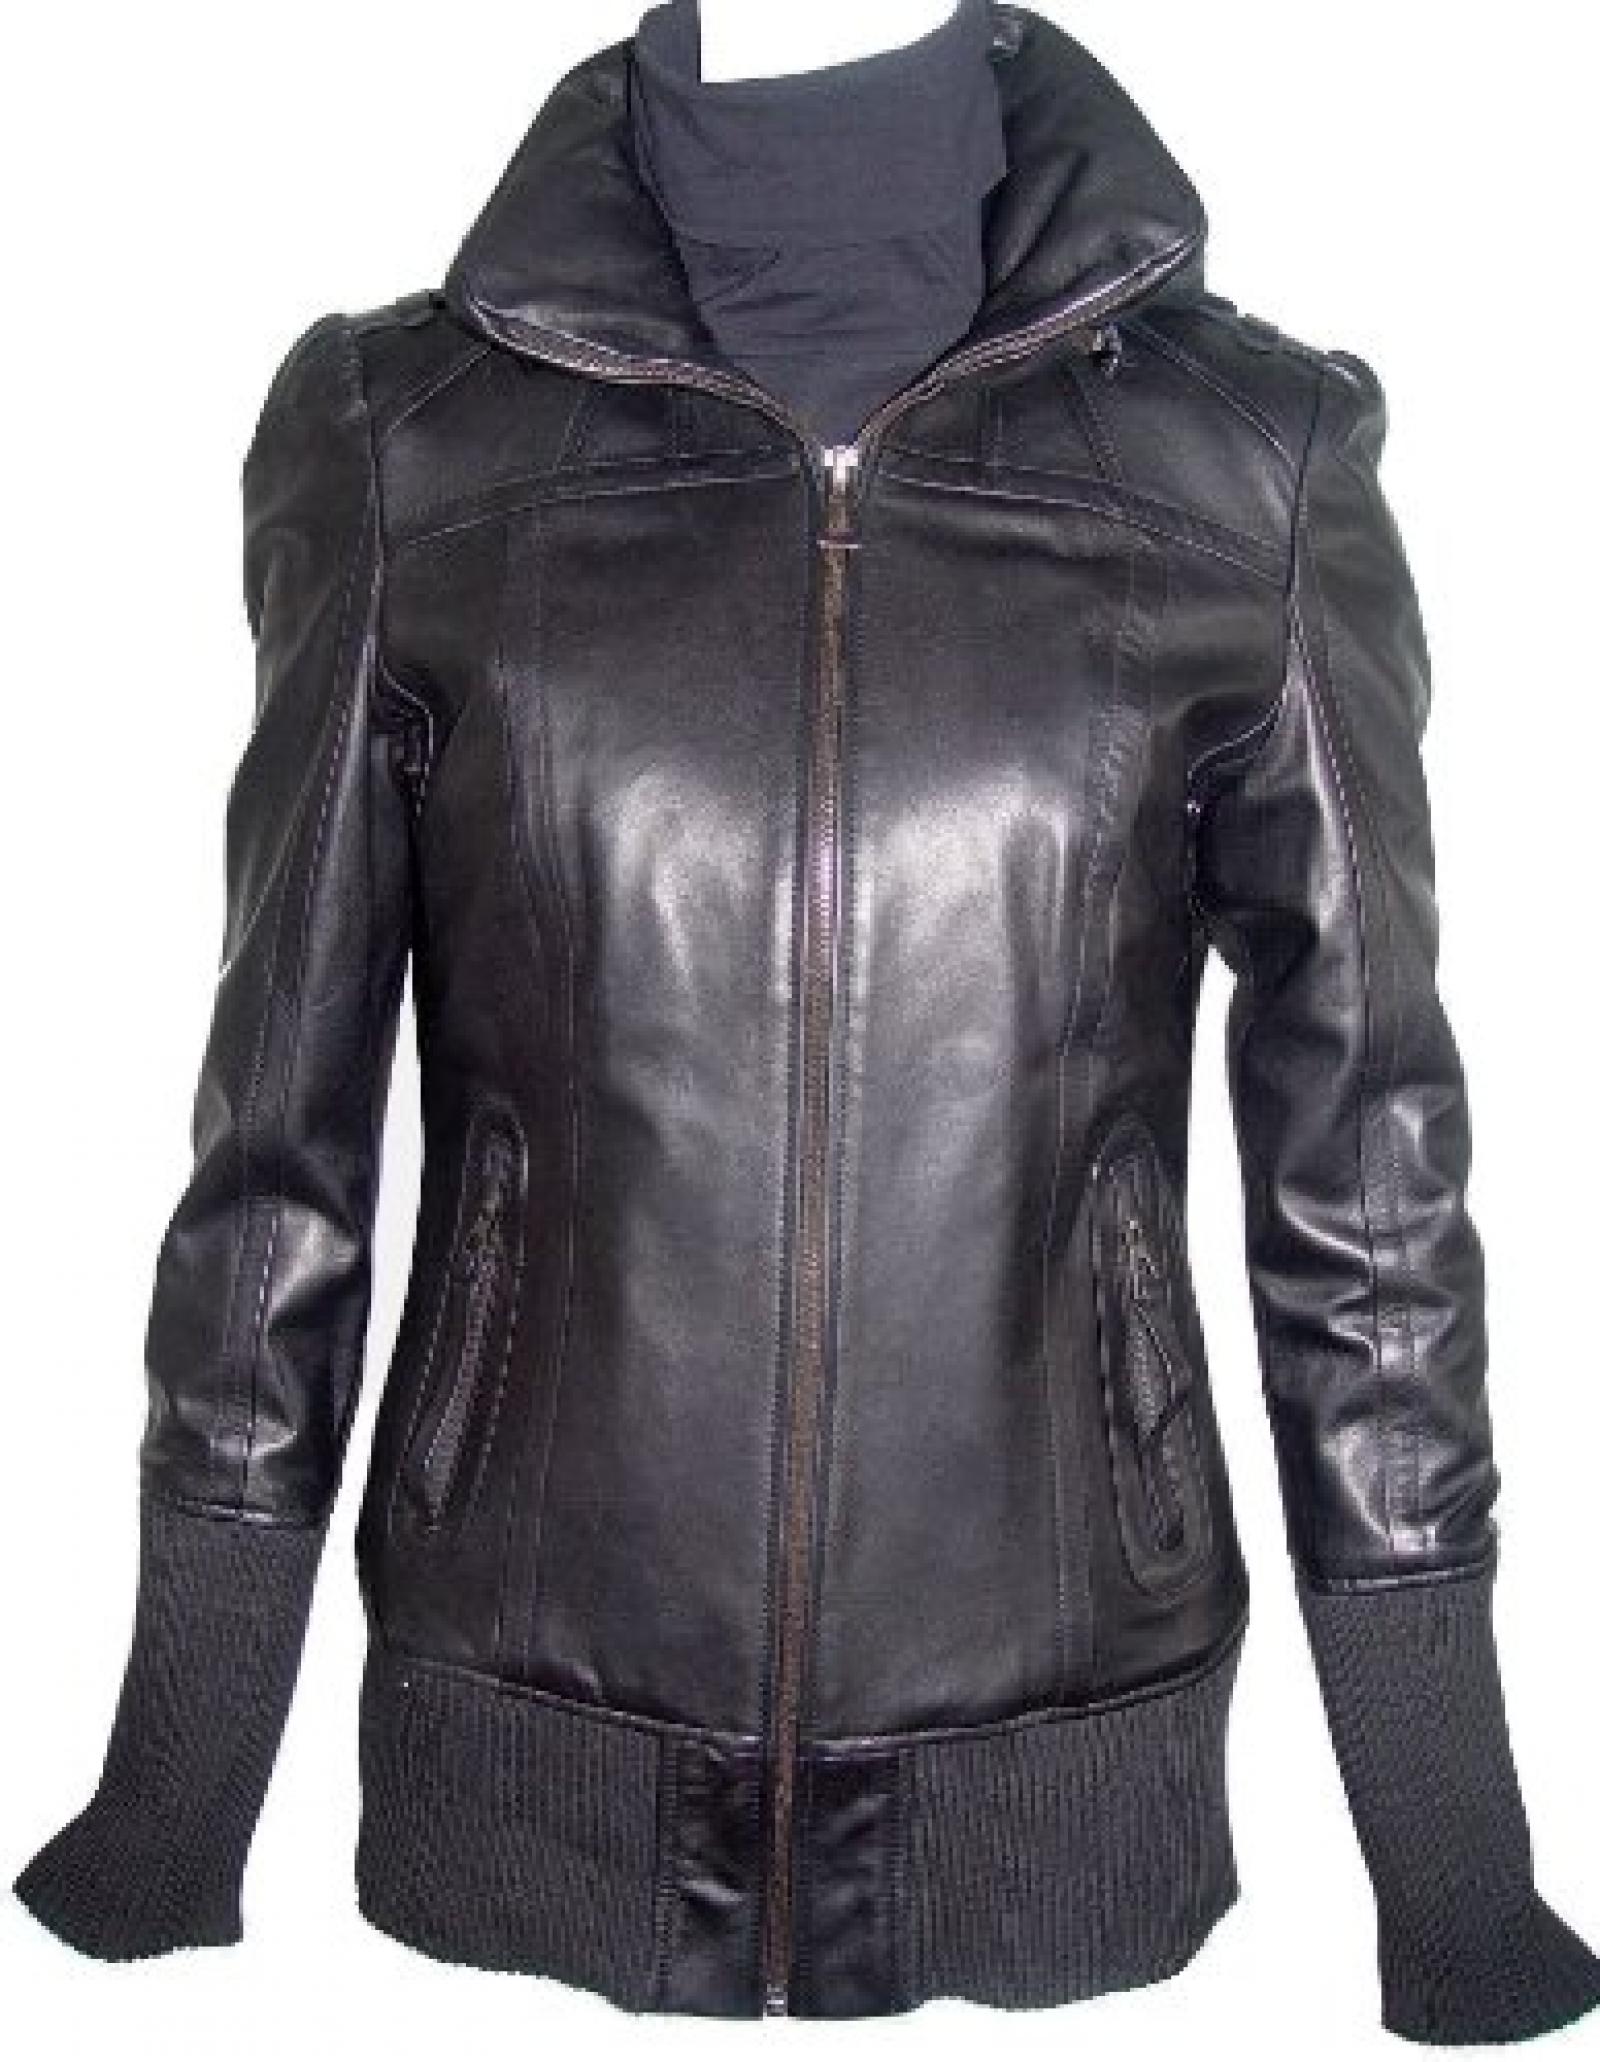 Paccilo FREE tailoring Womens 4021 Real Lambskin Short Leather Jacket 